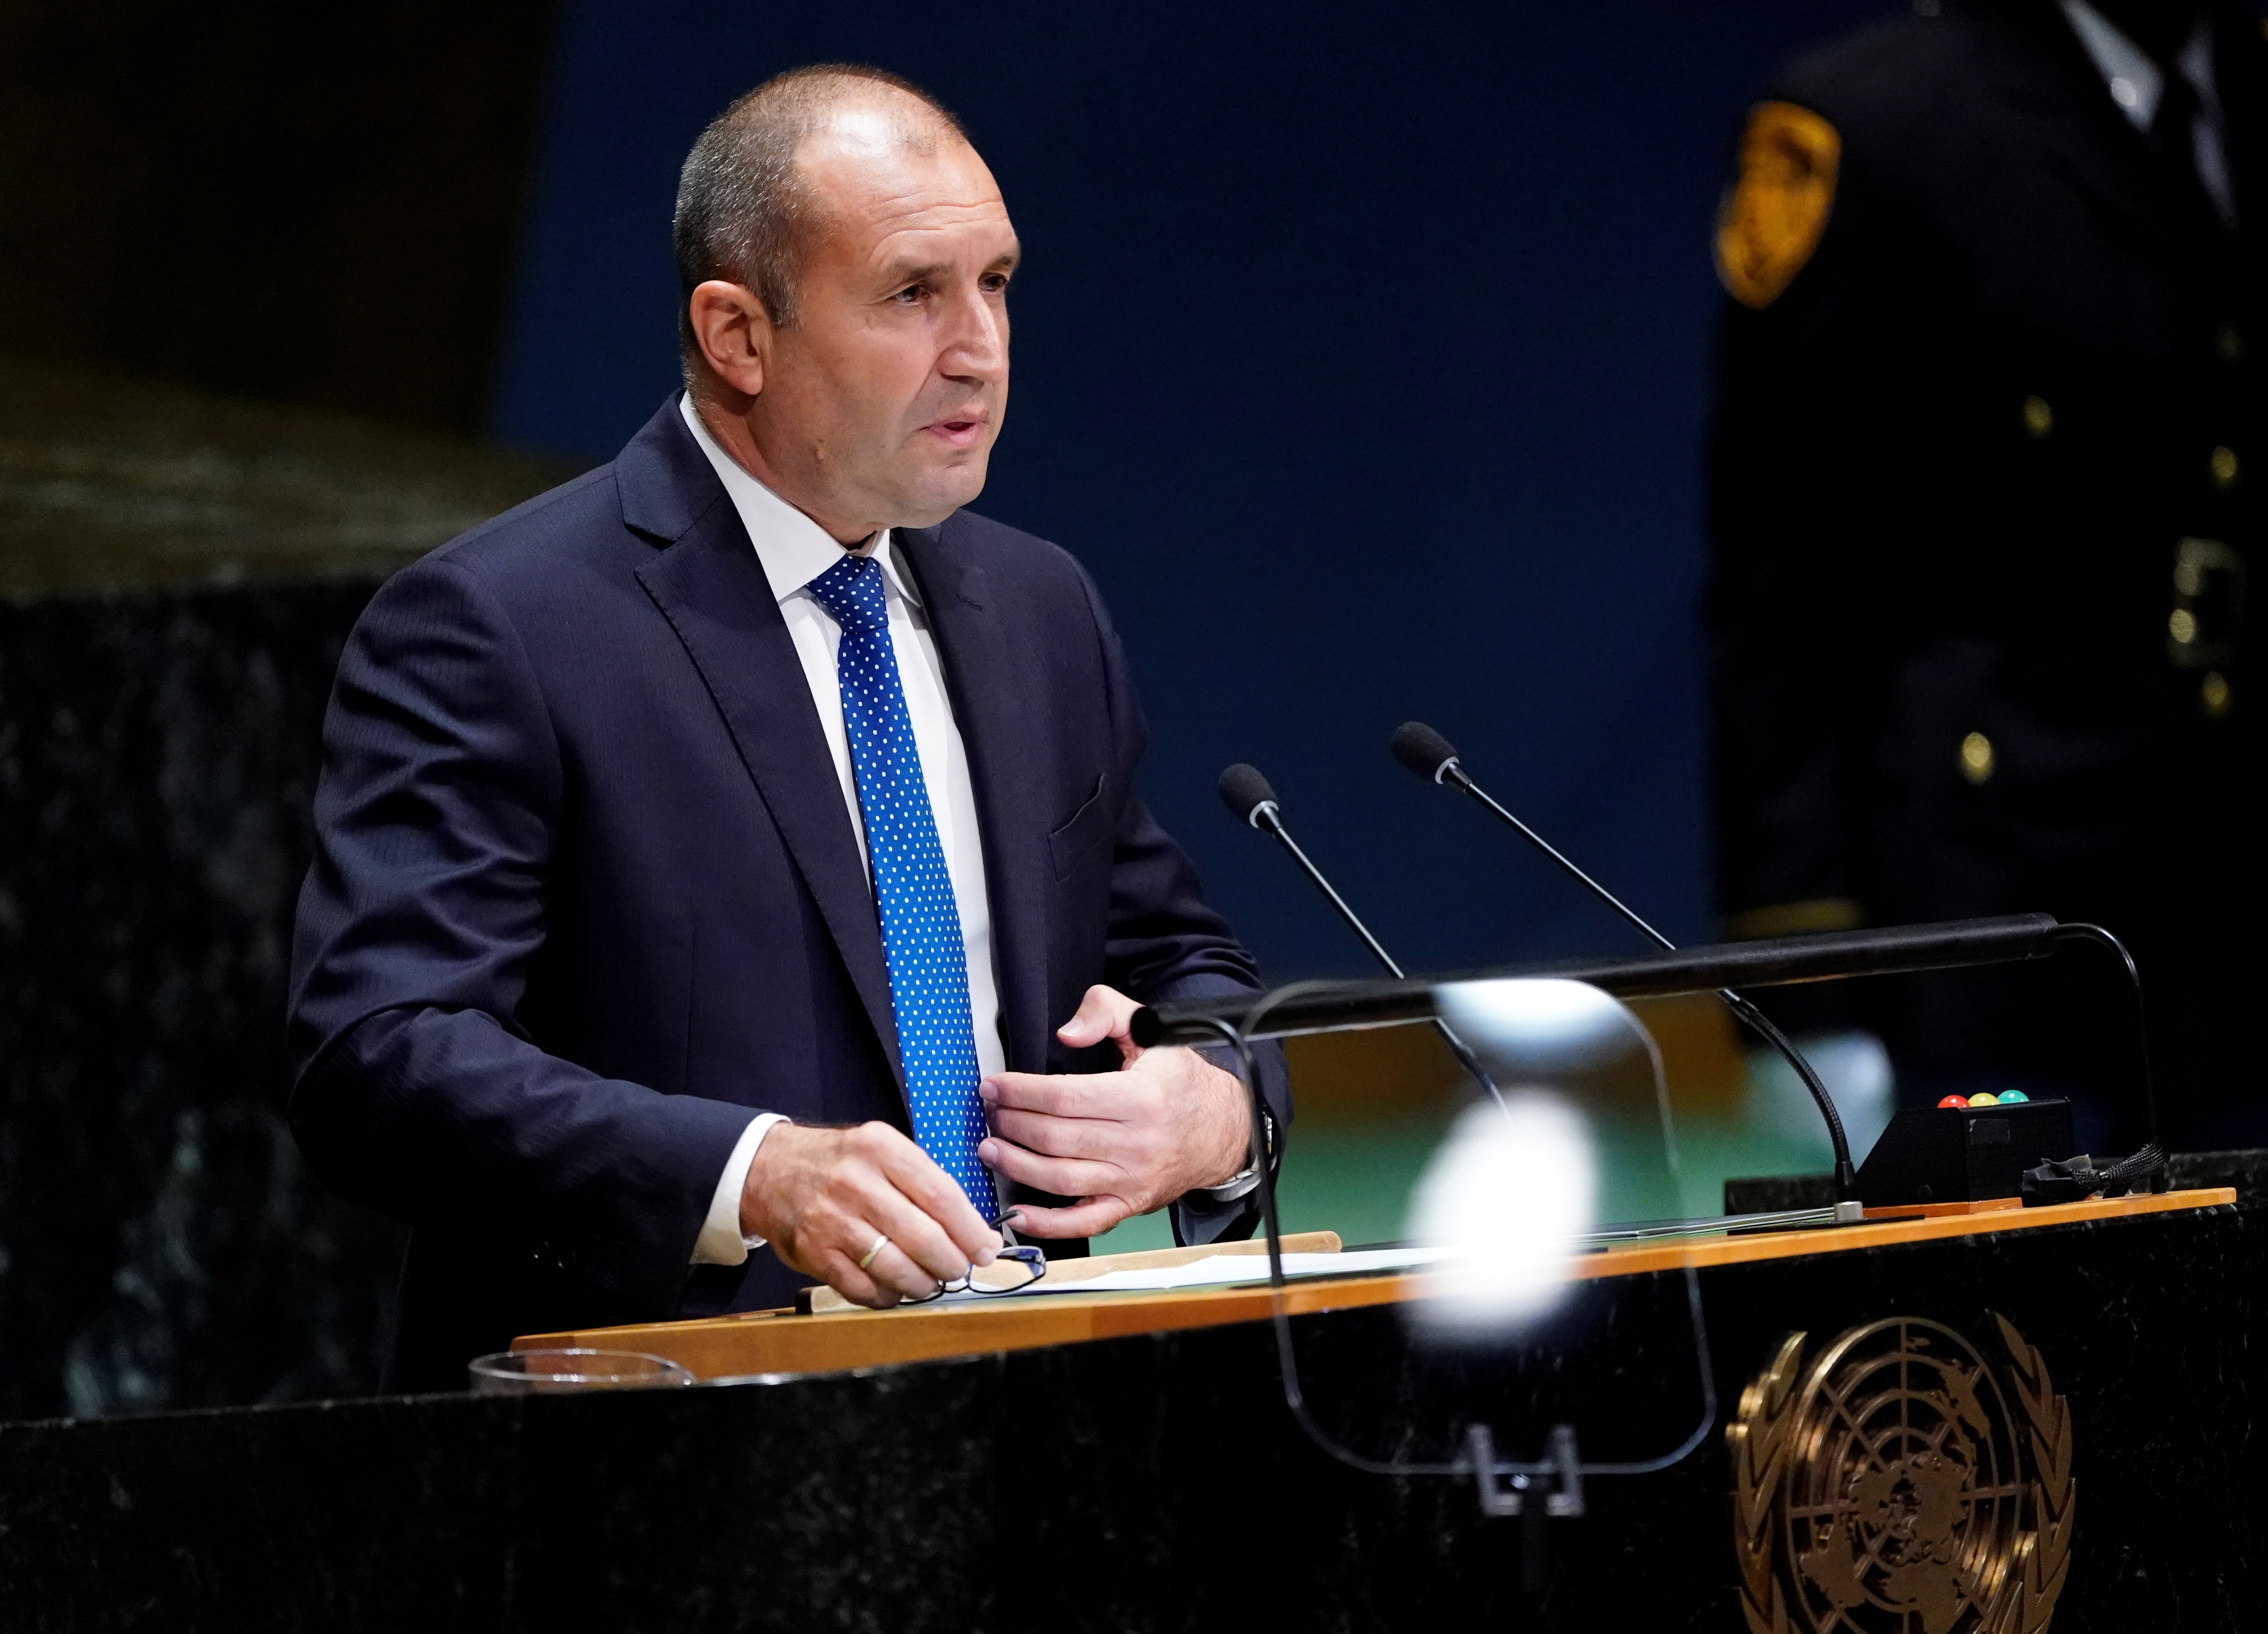 Bulgaria's President Rumen Radev addresses the 74th session of the United Nations General Assembly at U.N. headquarters in New York City, New York, U.S.